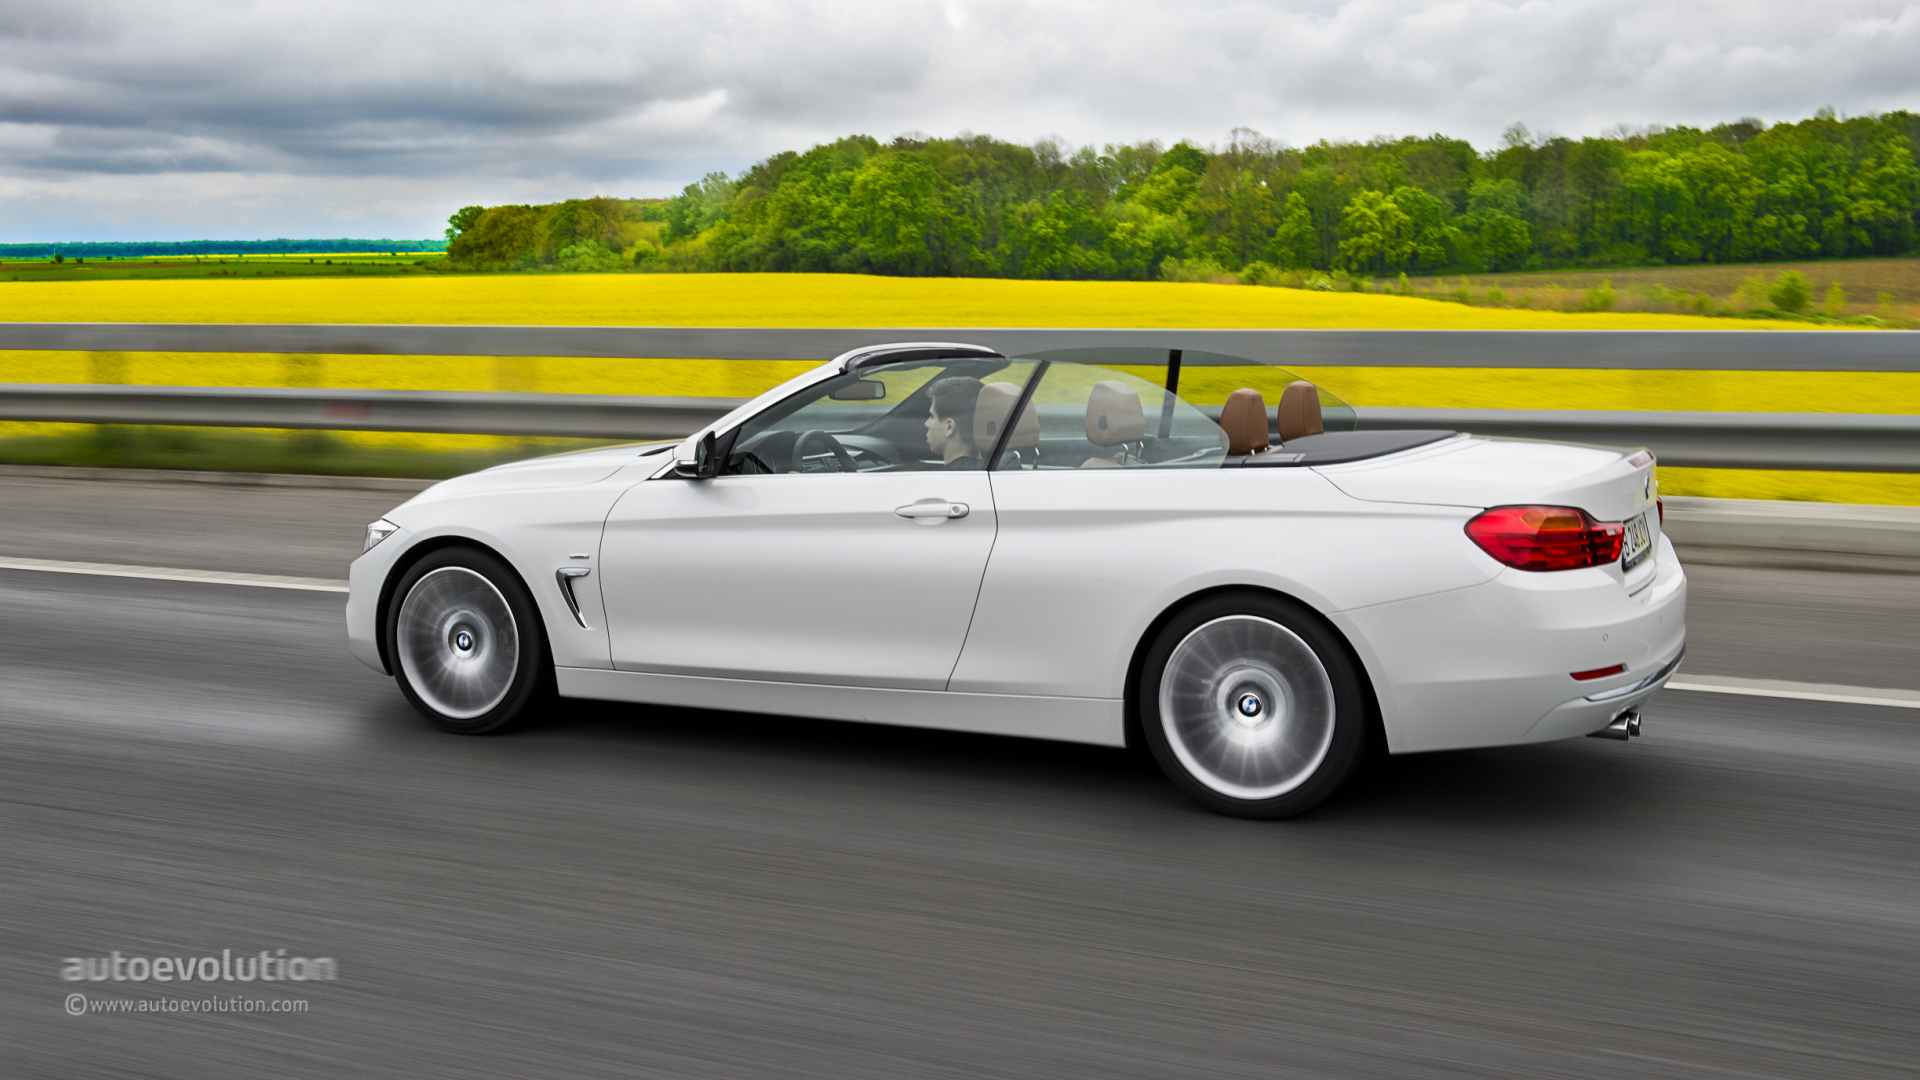 2014 Bmw 4-Series Convertible Wallpapers